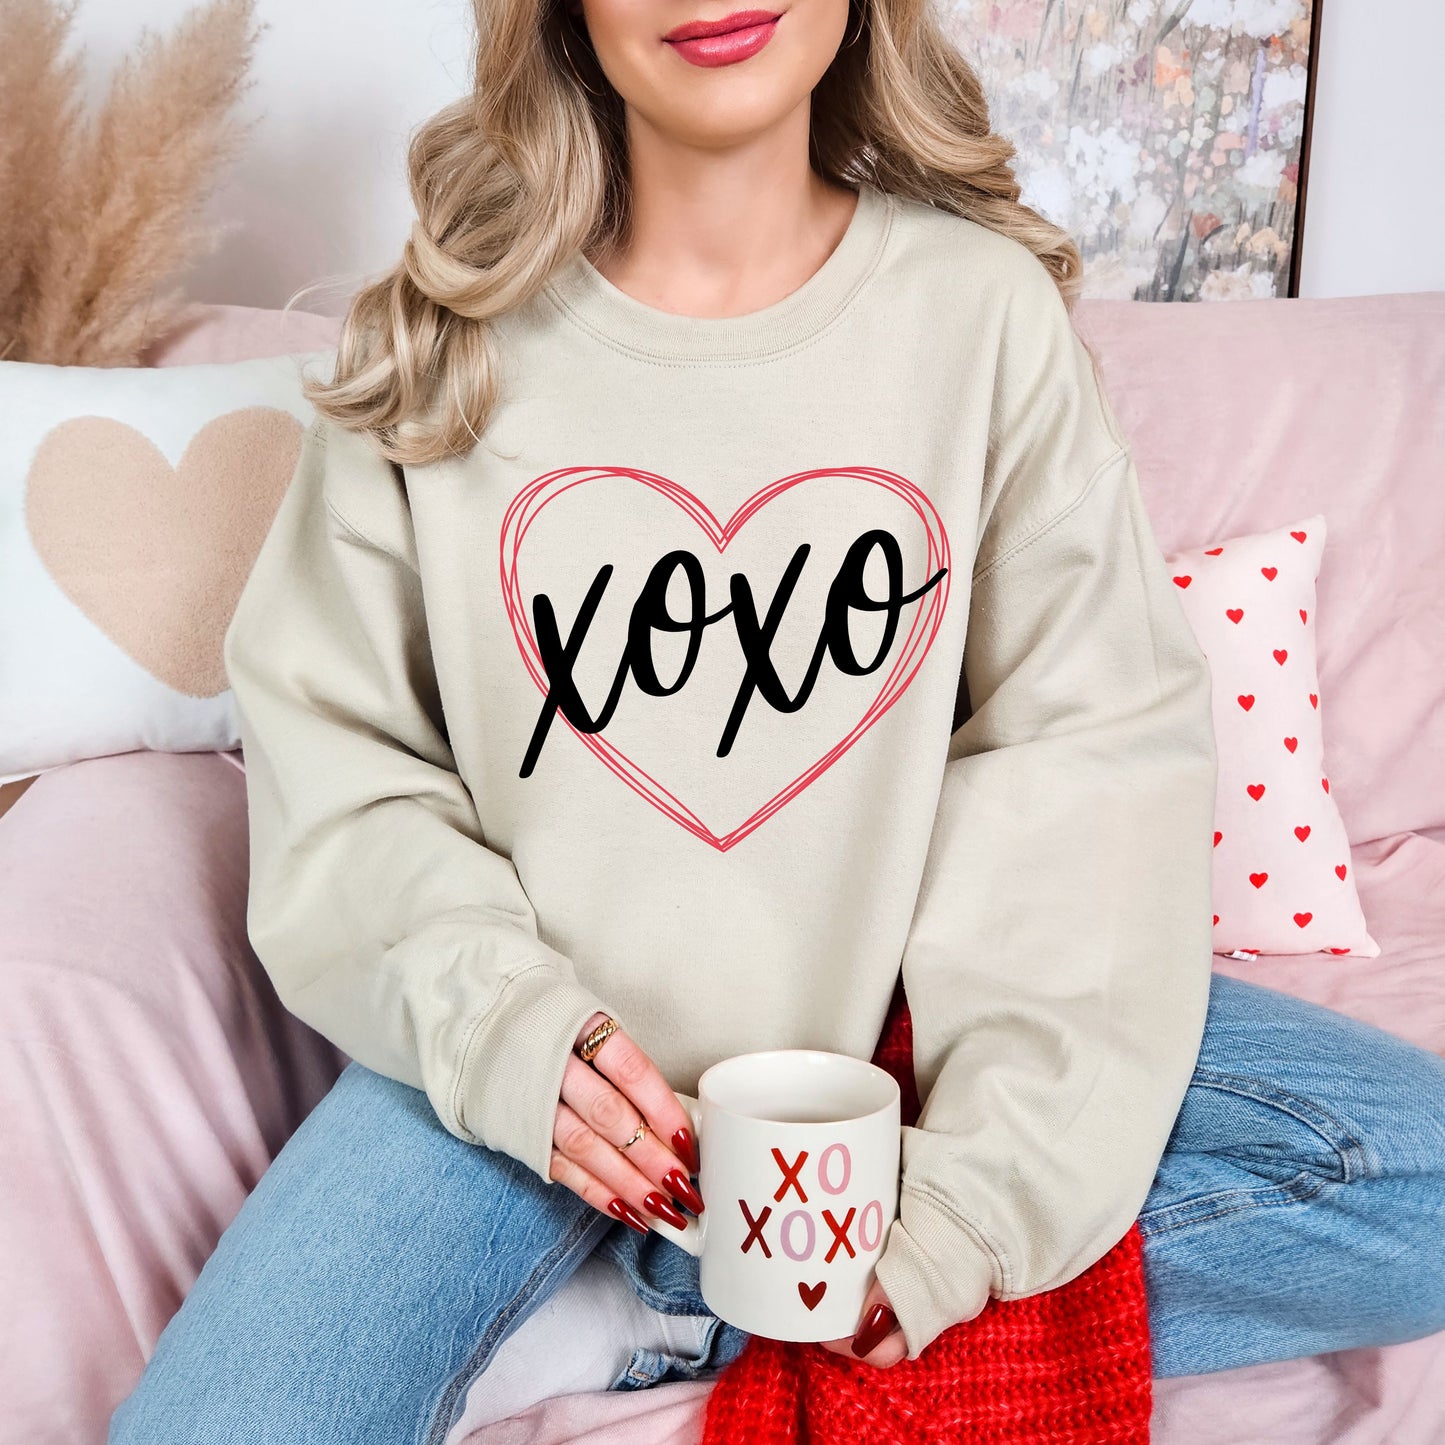 XOXO Heart Valentines Day Sweatshirt, Valentine Shirts for women and girls, Valentines Day Gifts for Mom